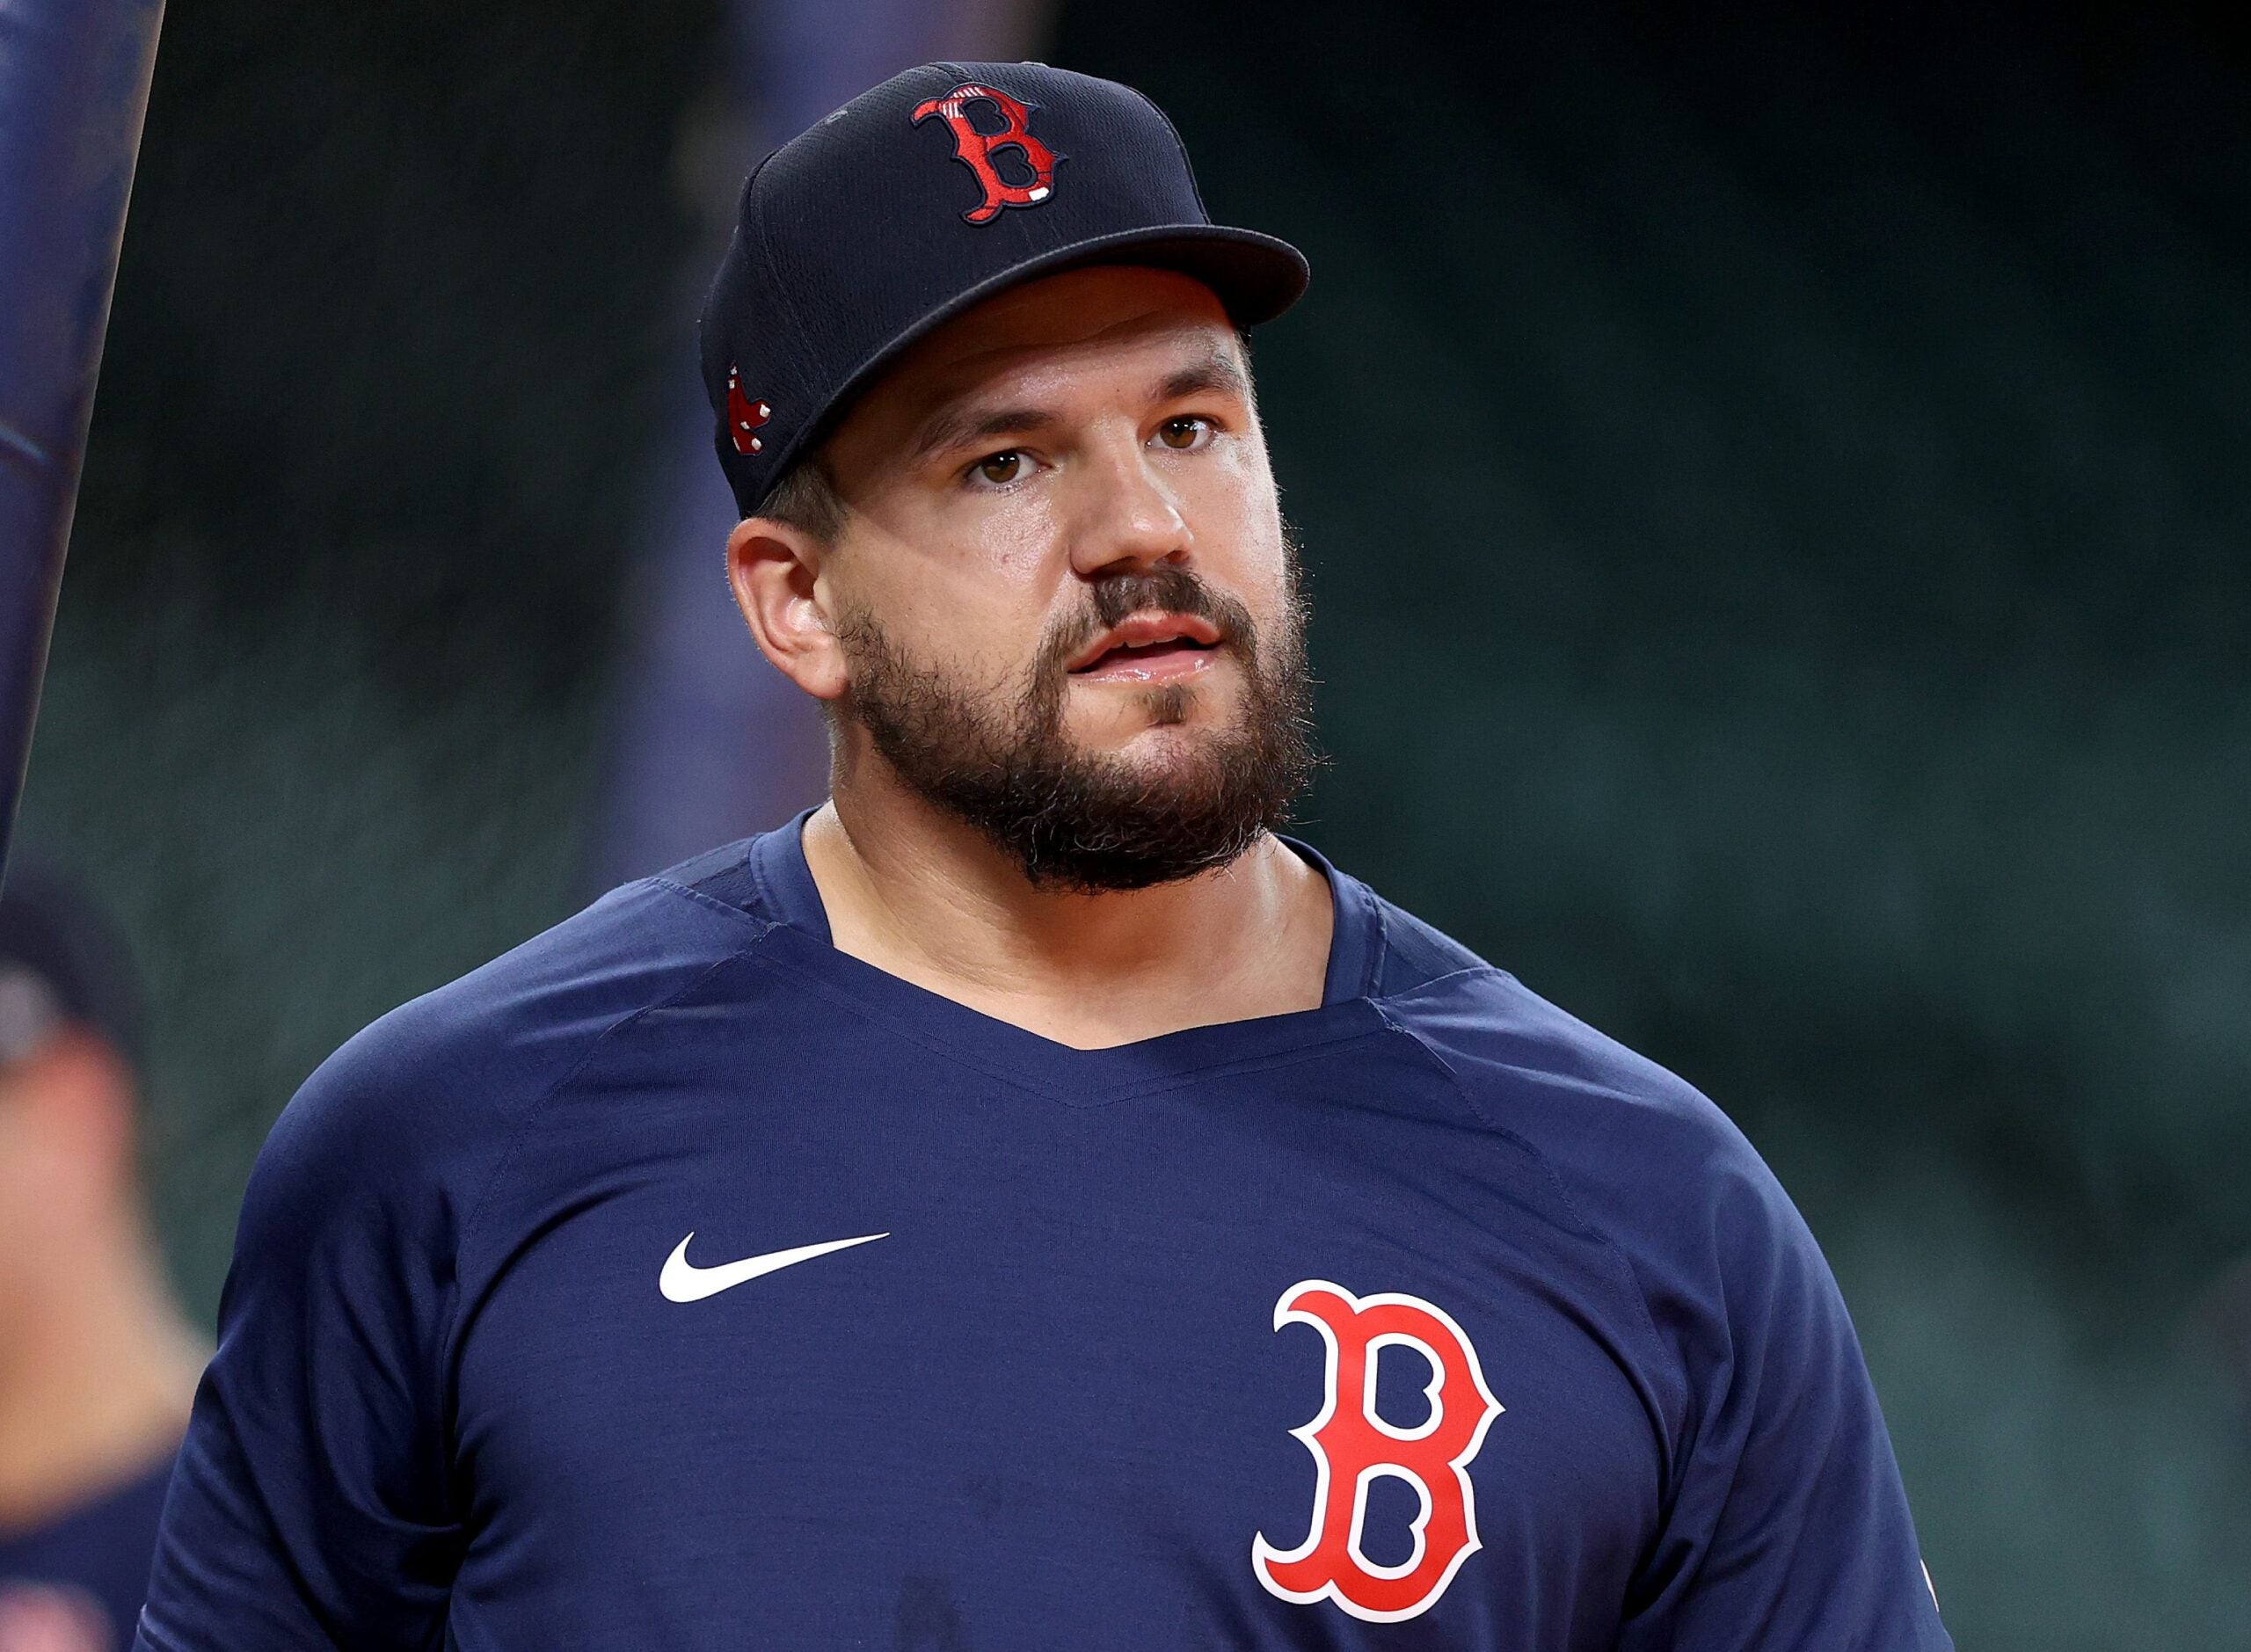 Kyle Schwarber ordered pizza for firefighters and police officers in Waltham